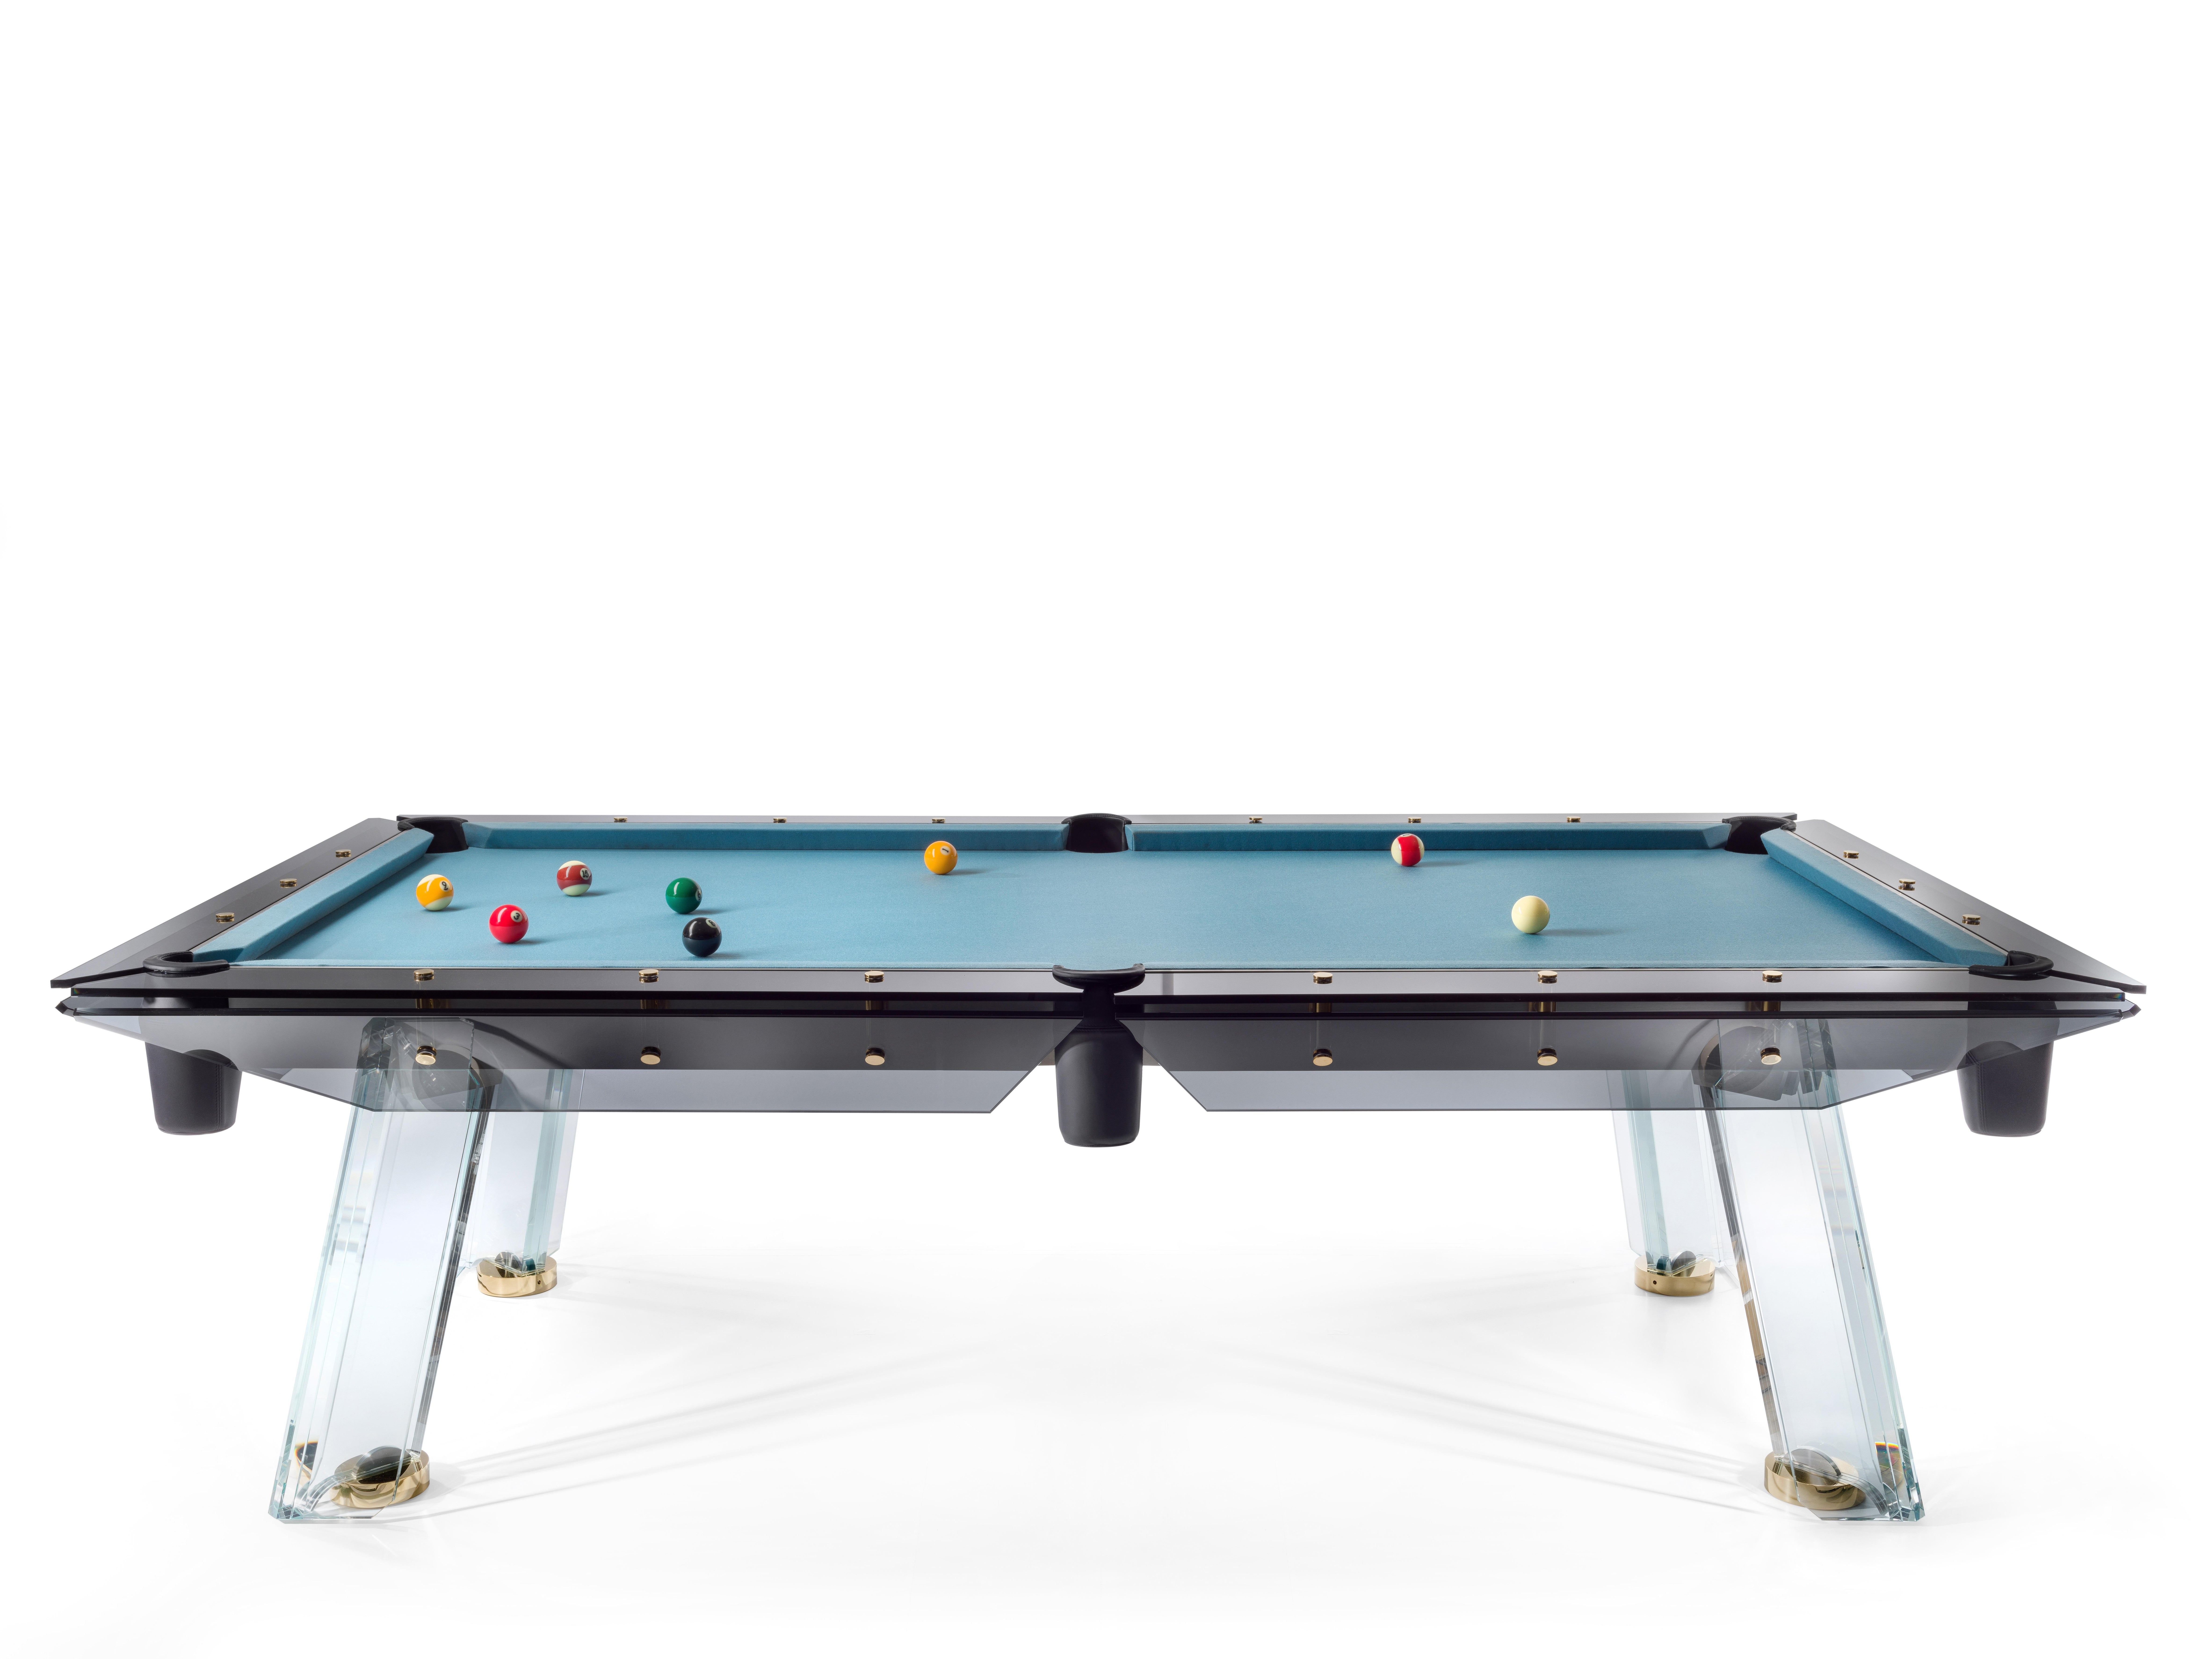 Filotto Gold Smoked glass player pool table by Impatia
Dimensions: D268 x W152 x H82 cm
Weight: 640 kg
Material: Frame and legs in Smoked glass, 24k gold plated components
Three-piece Italian slate base,Simonis cloth,Leather pockets.
Also